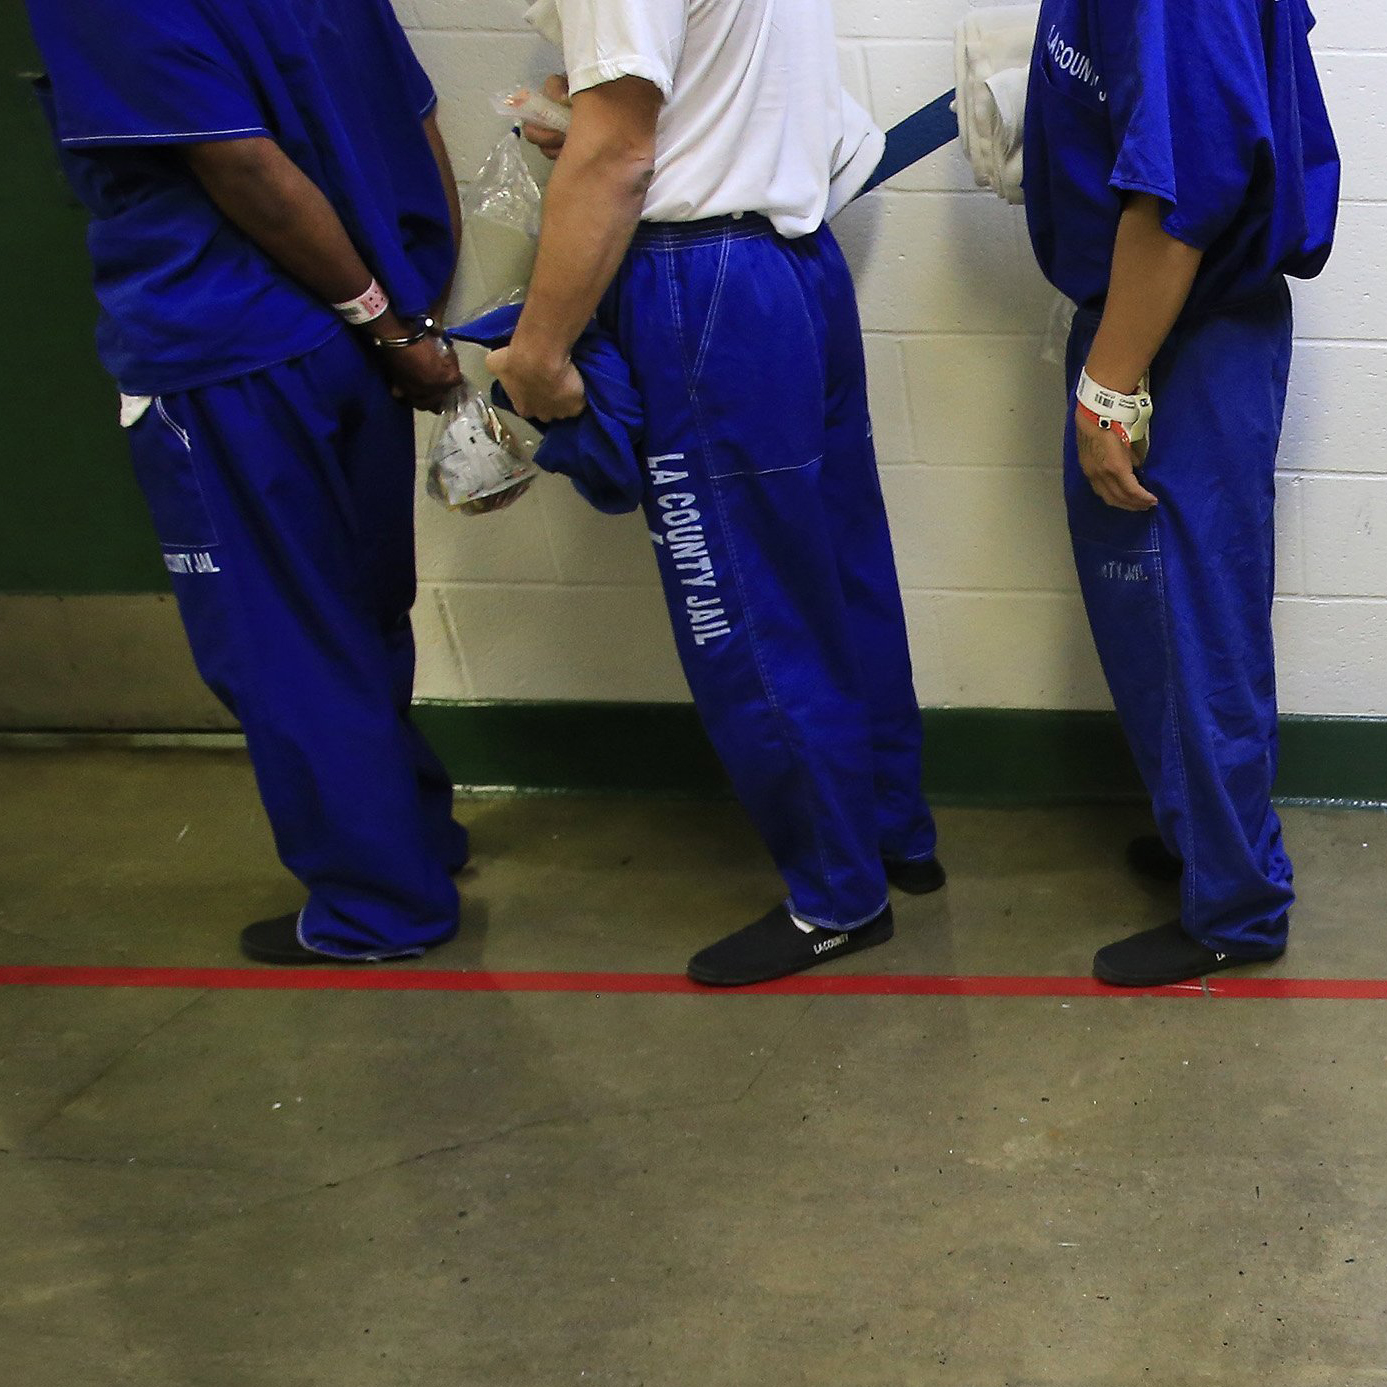 Three male inmates stand in a queue, wearing blue pants and blue shirts, except for the middle person who is wearing a white undershirt. They are seen only from the lower torso to their feet.